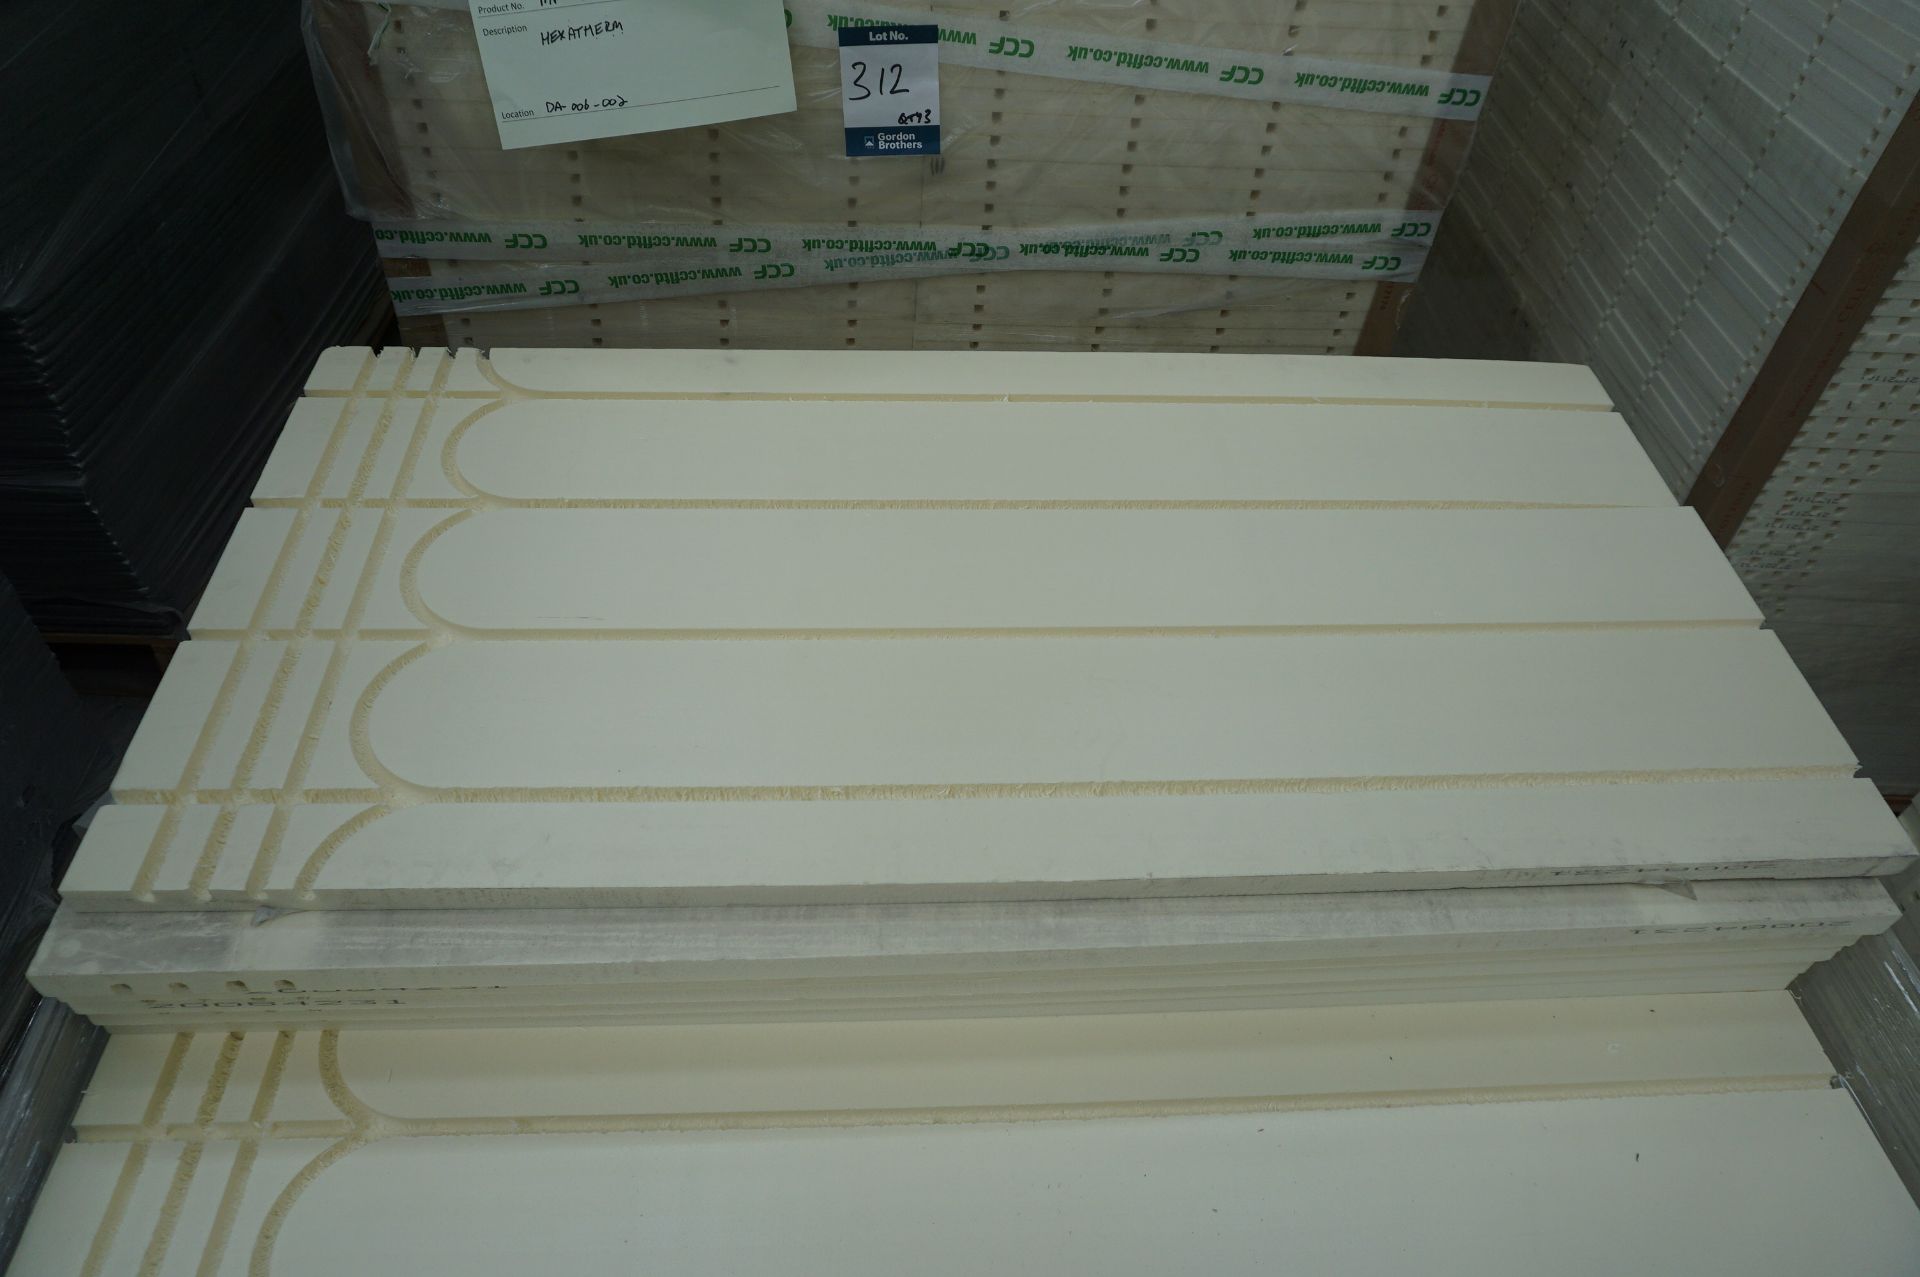 Approx. 150x (no.) Cellecta, Heatherm XLFO high compressive underfloor heating insulation sheets, - Image 4 of 6